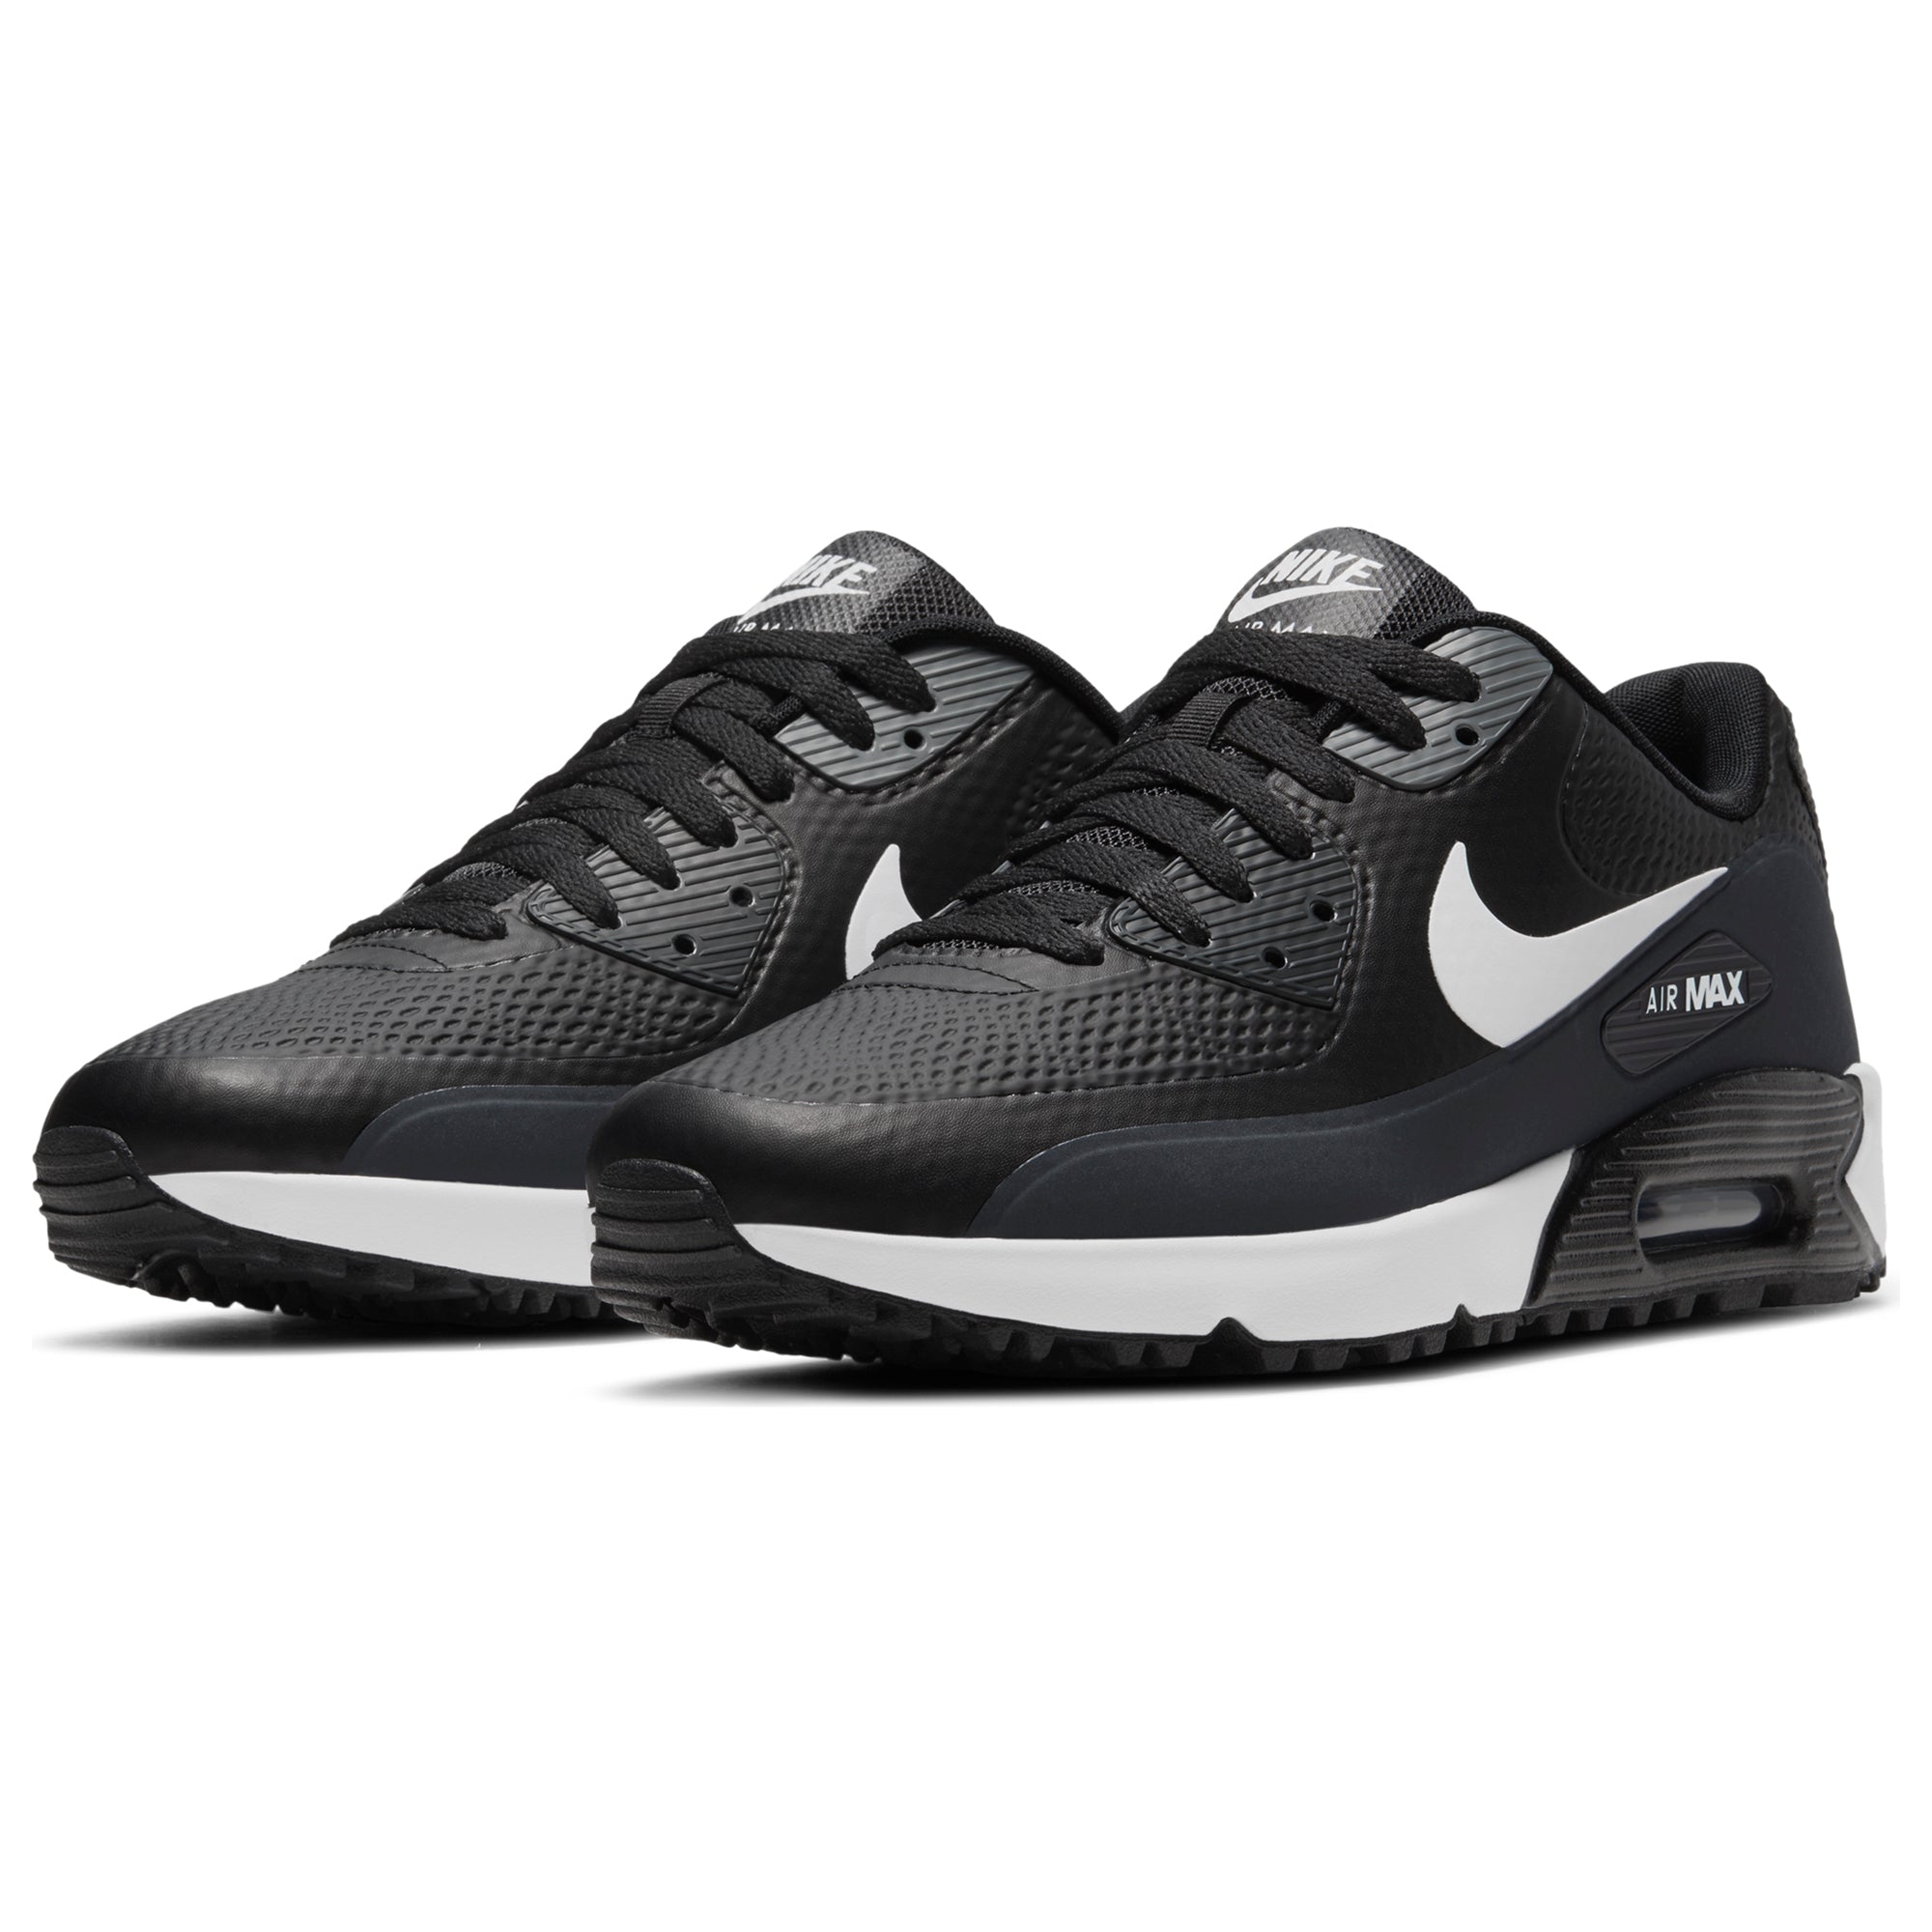 Nike Golf Air Max 90 G Shoes CU9978 Black White Anthracite 002 & Function18